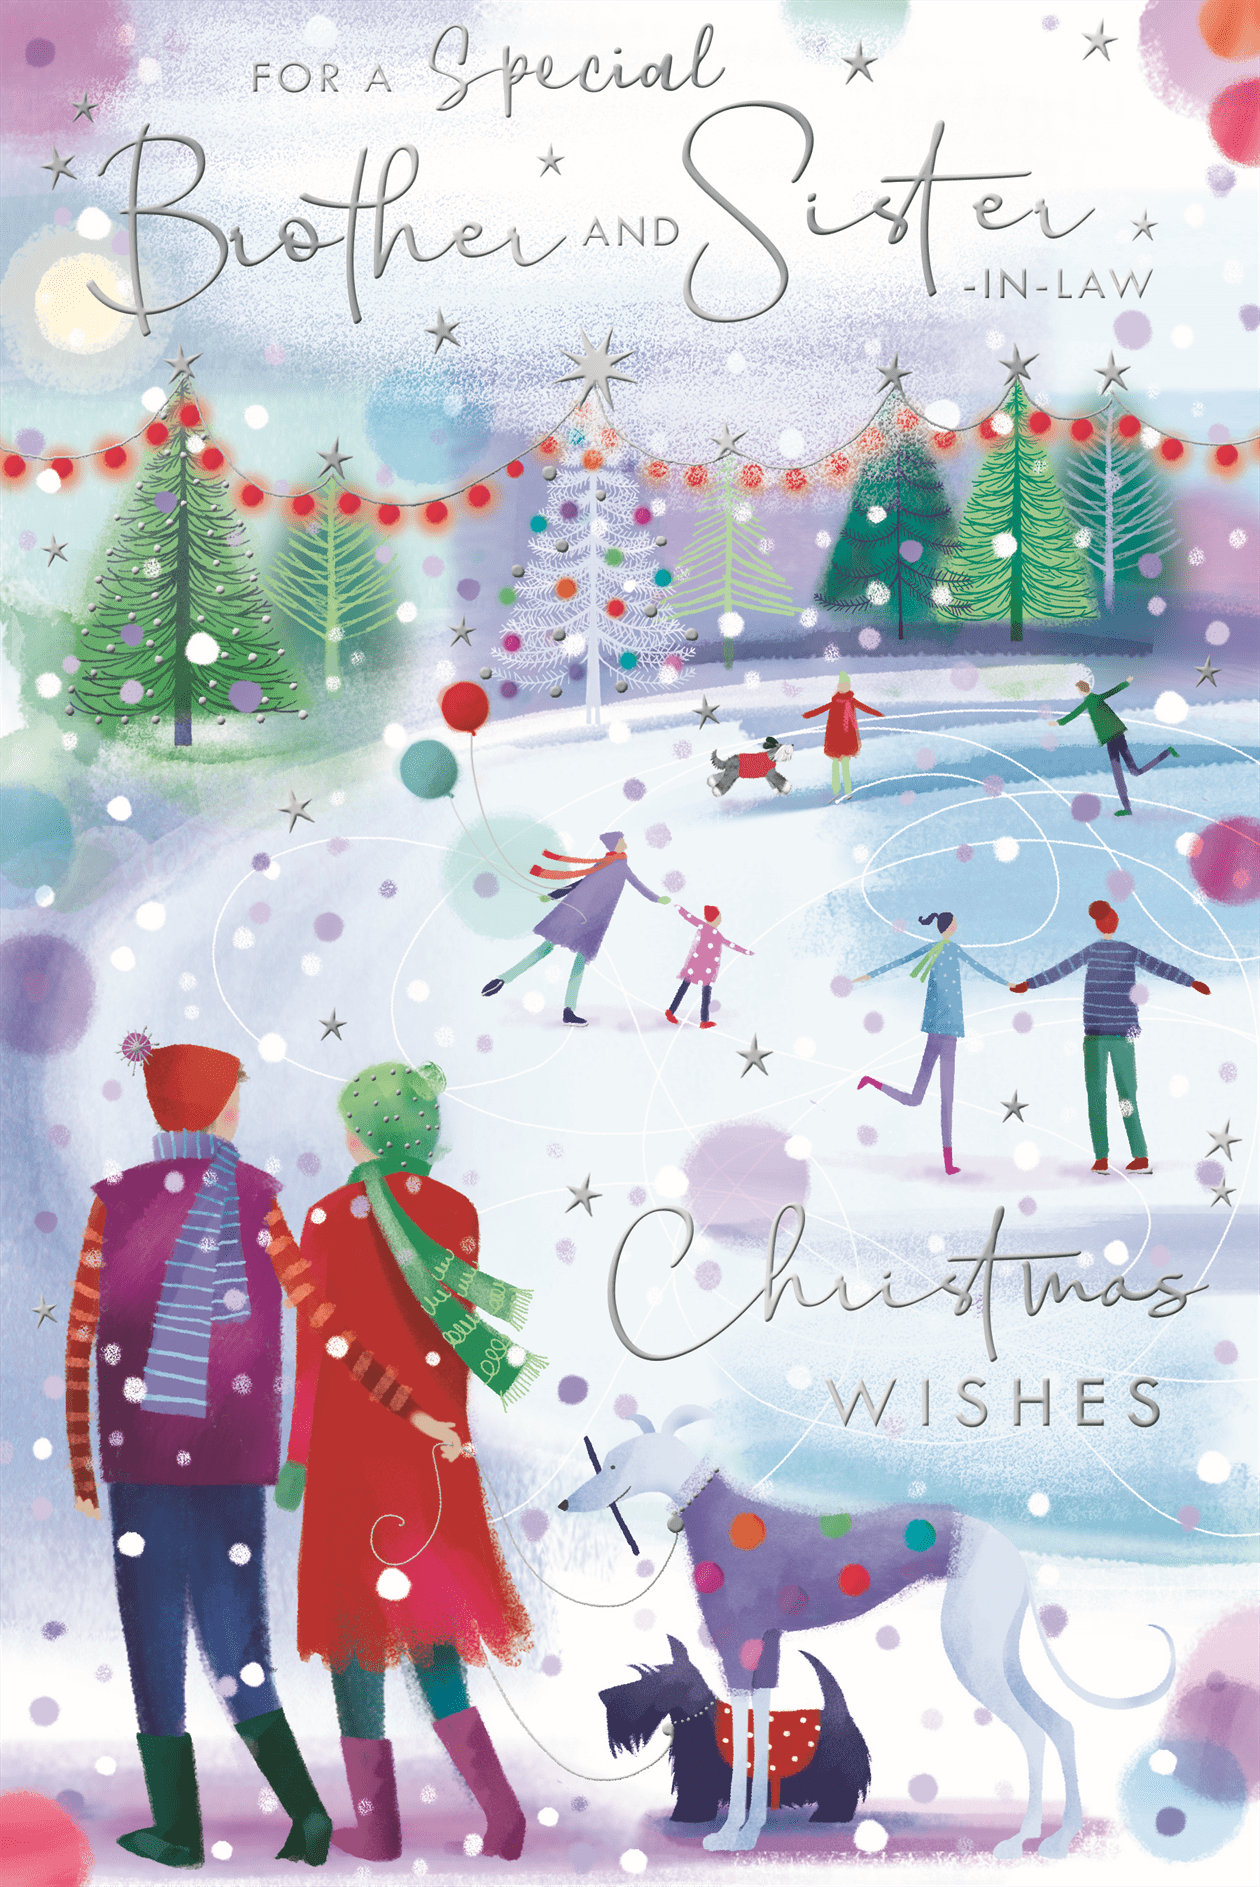 Brother and Sister-in-law Christmas card - festive scene